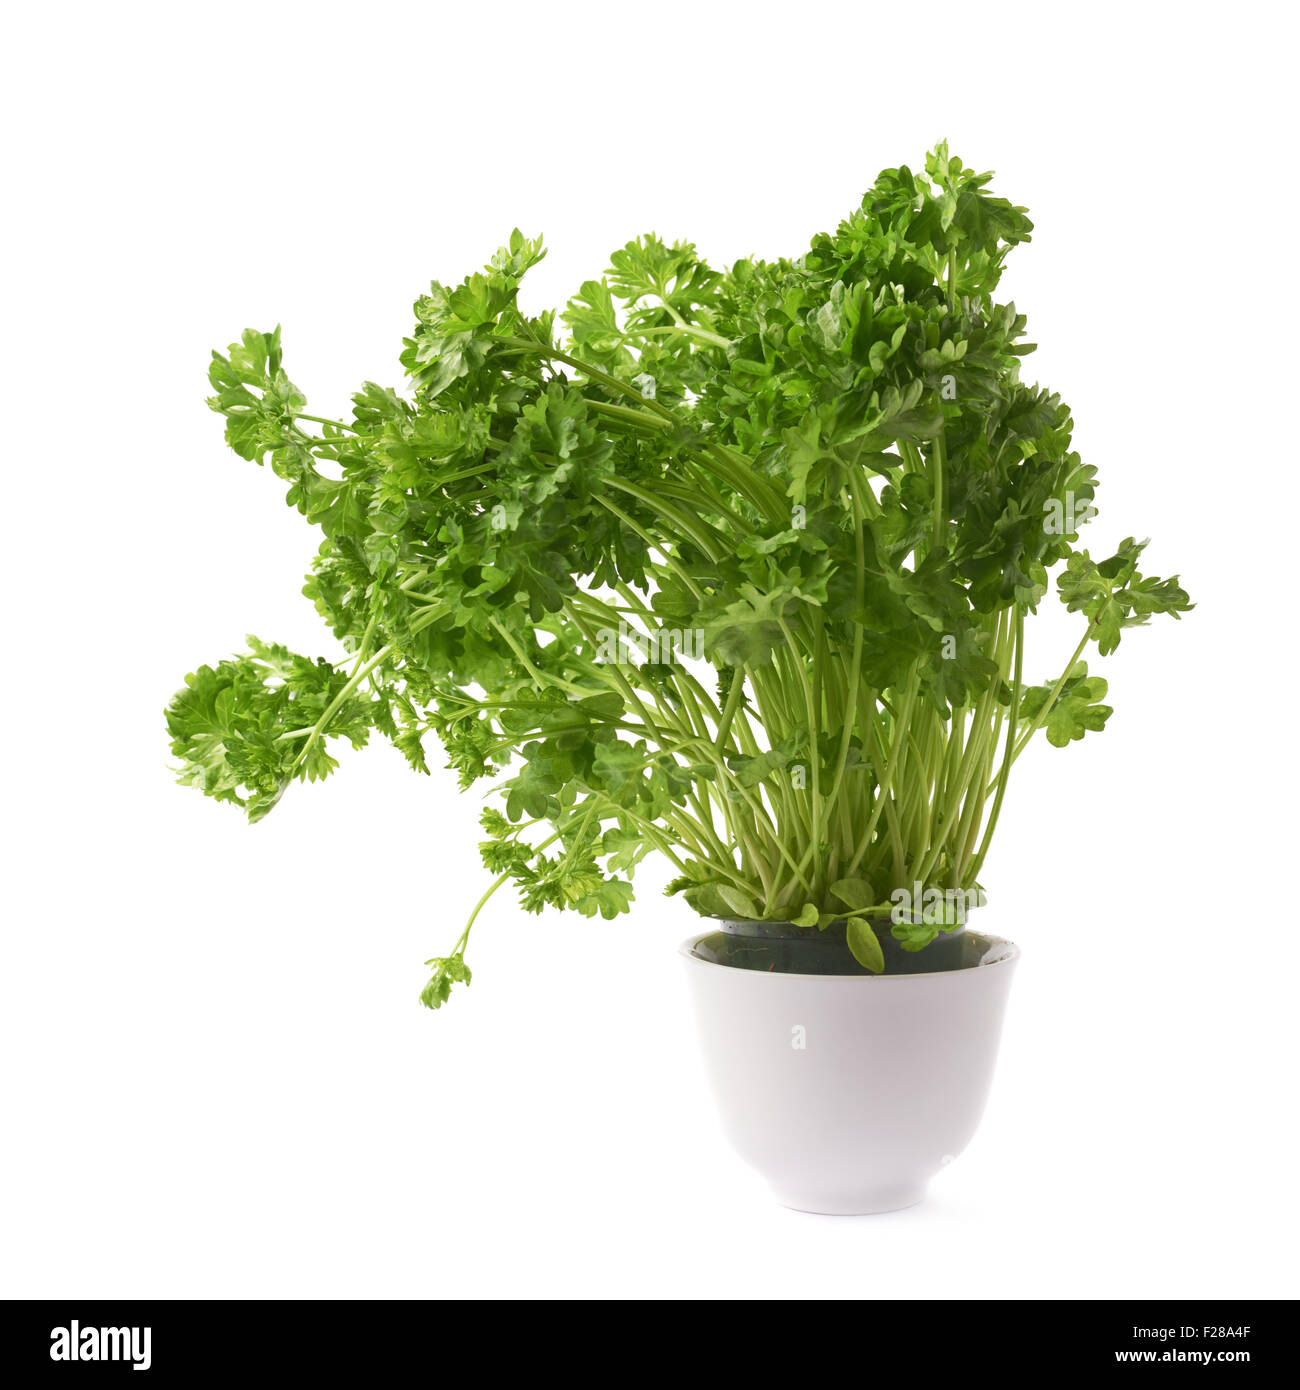 Petroselinum crispum apiaceae garden parsley plant in a white ceramic pot, composition isolated over the white background Stock Photo